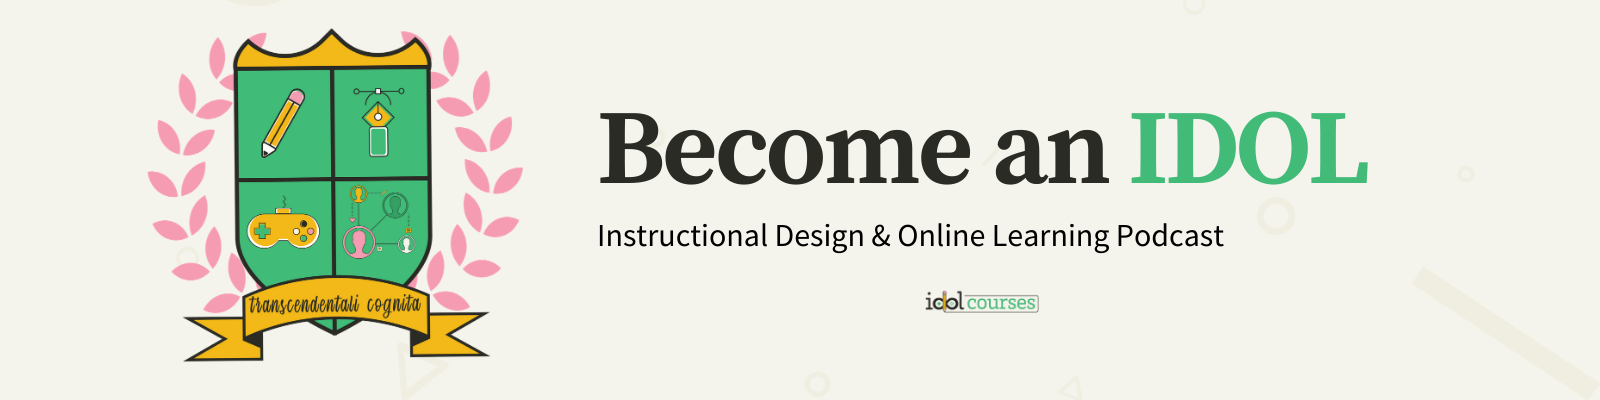 Become an IDOL: Instructional Design and Online Learning